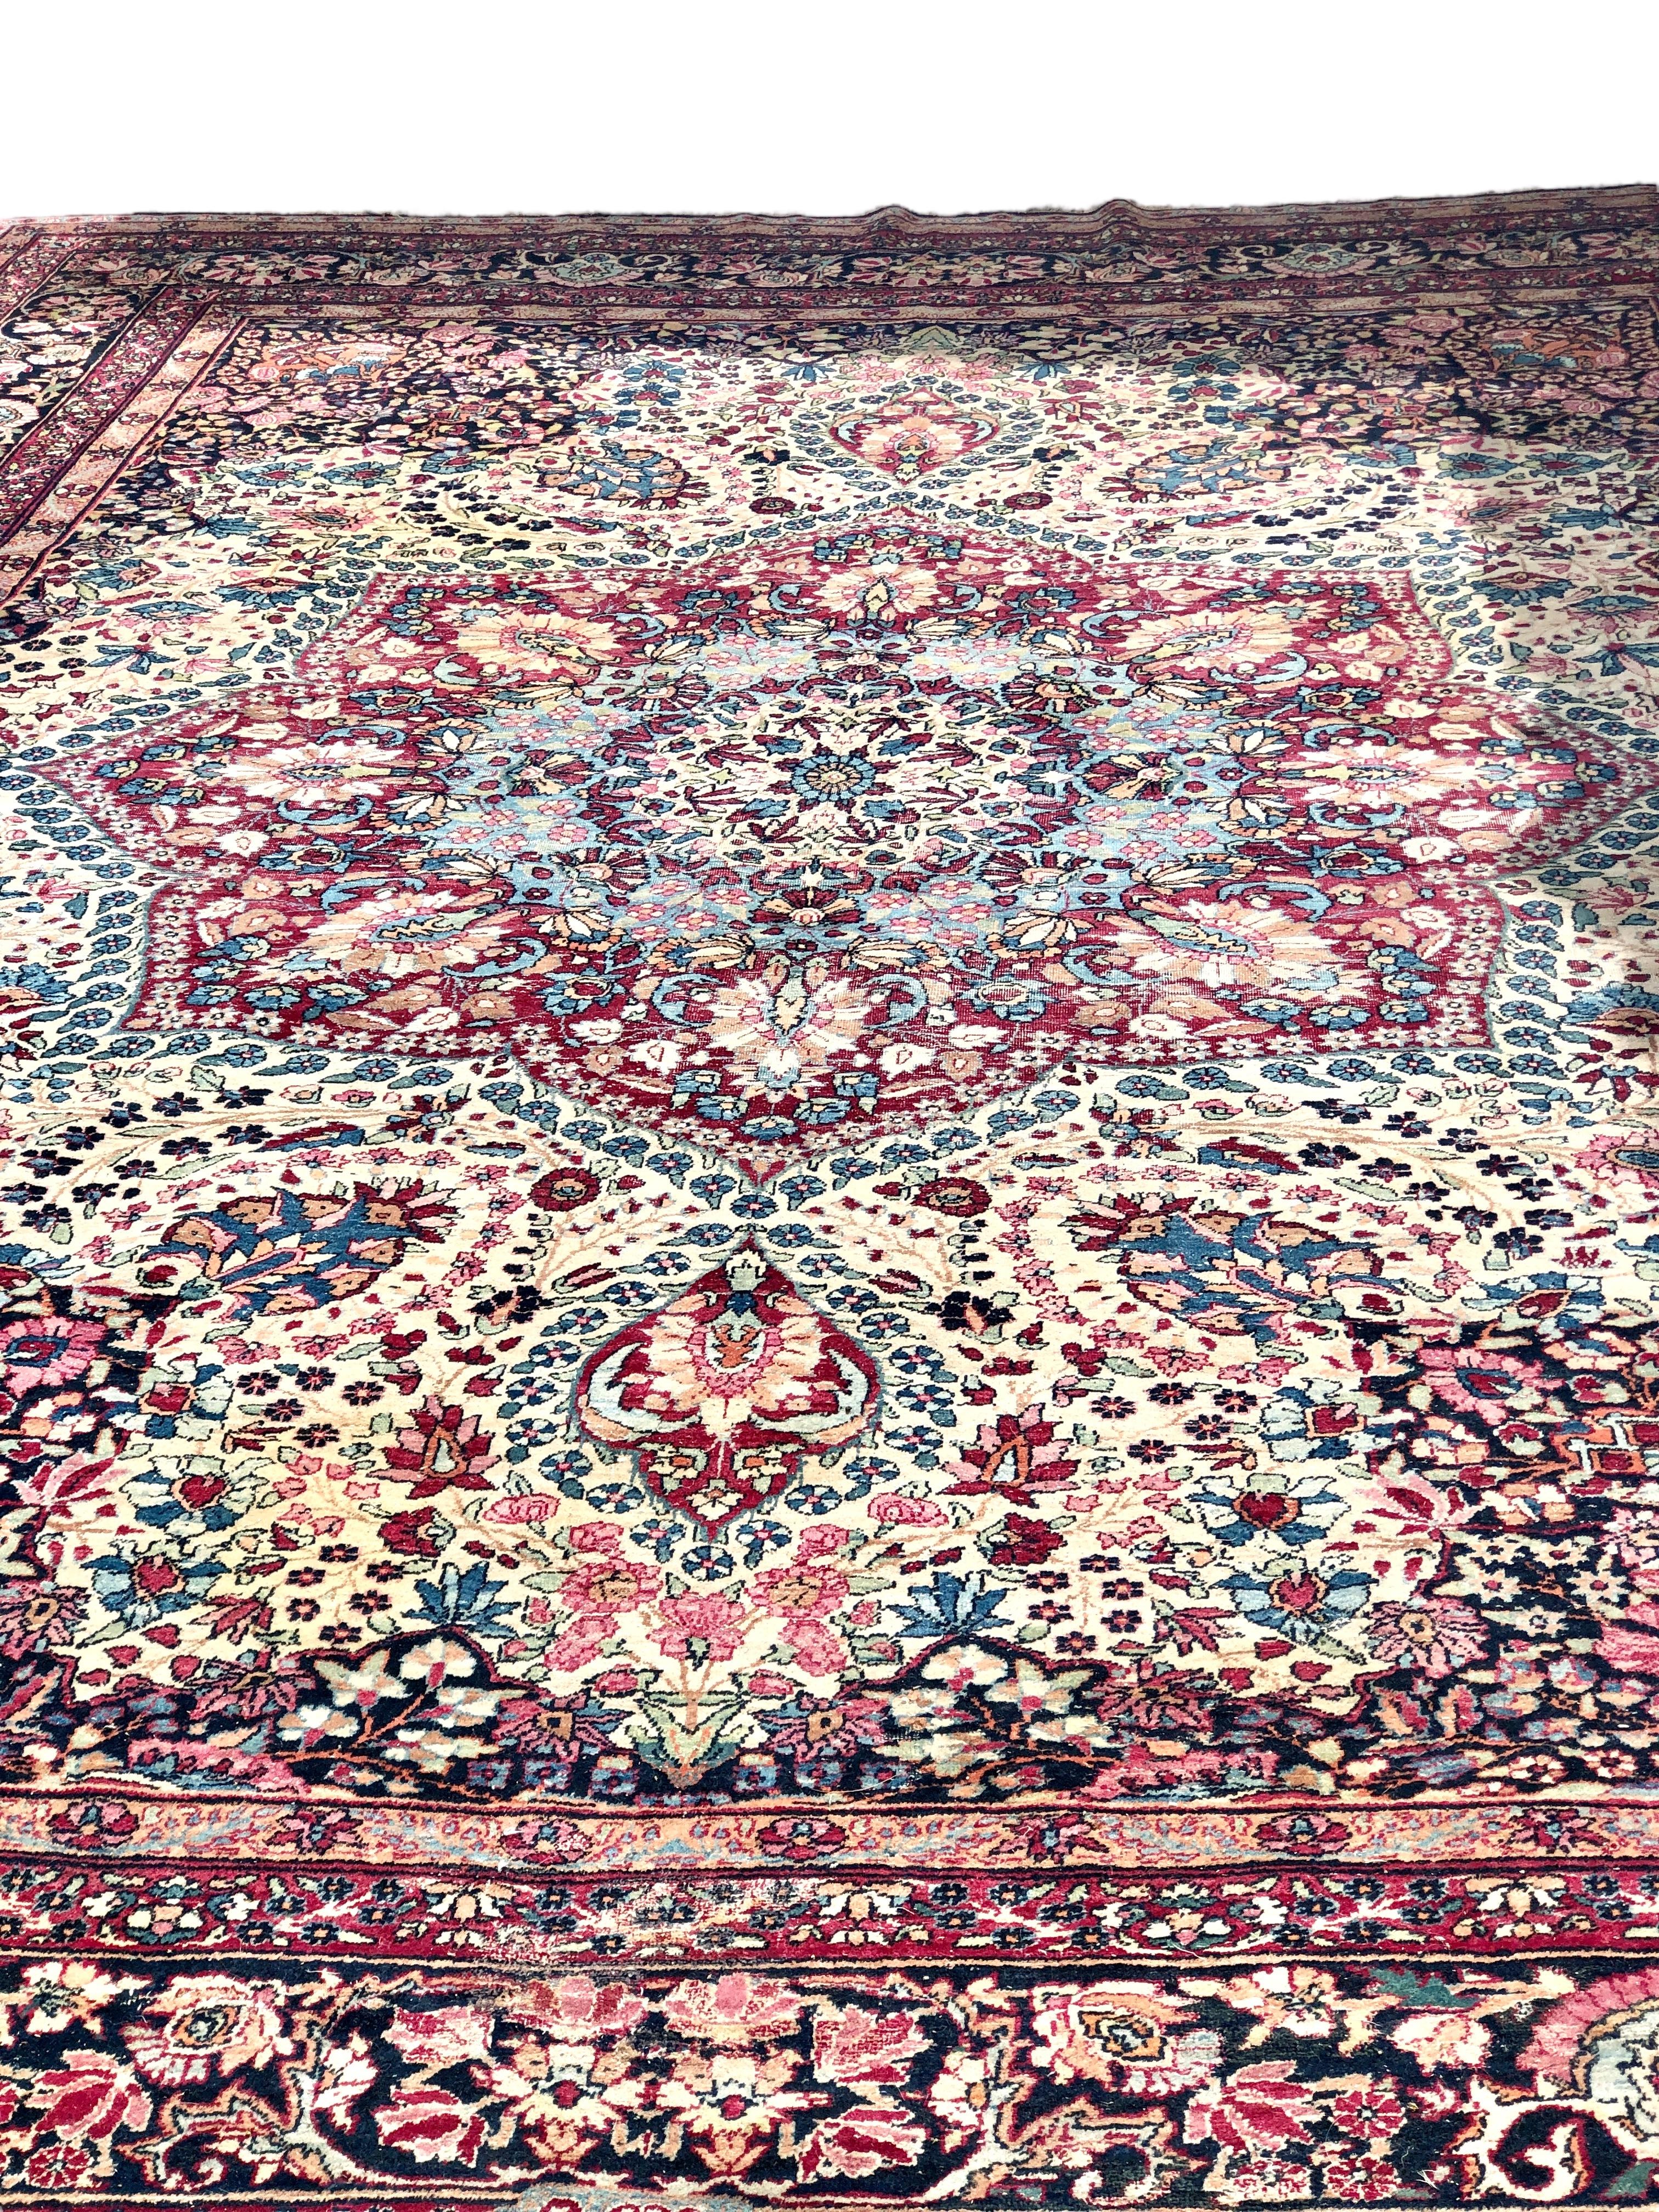 An outstanding antique Persian Kirman rug woven with a mesmerizing pattern reminiscent of a stained-glass window. Bold pinks, blues, reds and golds abound in an intricate botanical design, radiating outwards from an exquisite eight-petalled flower